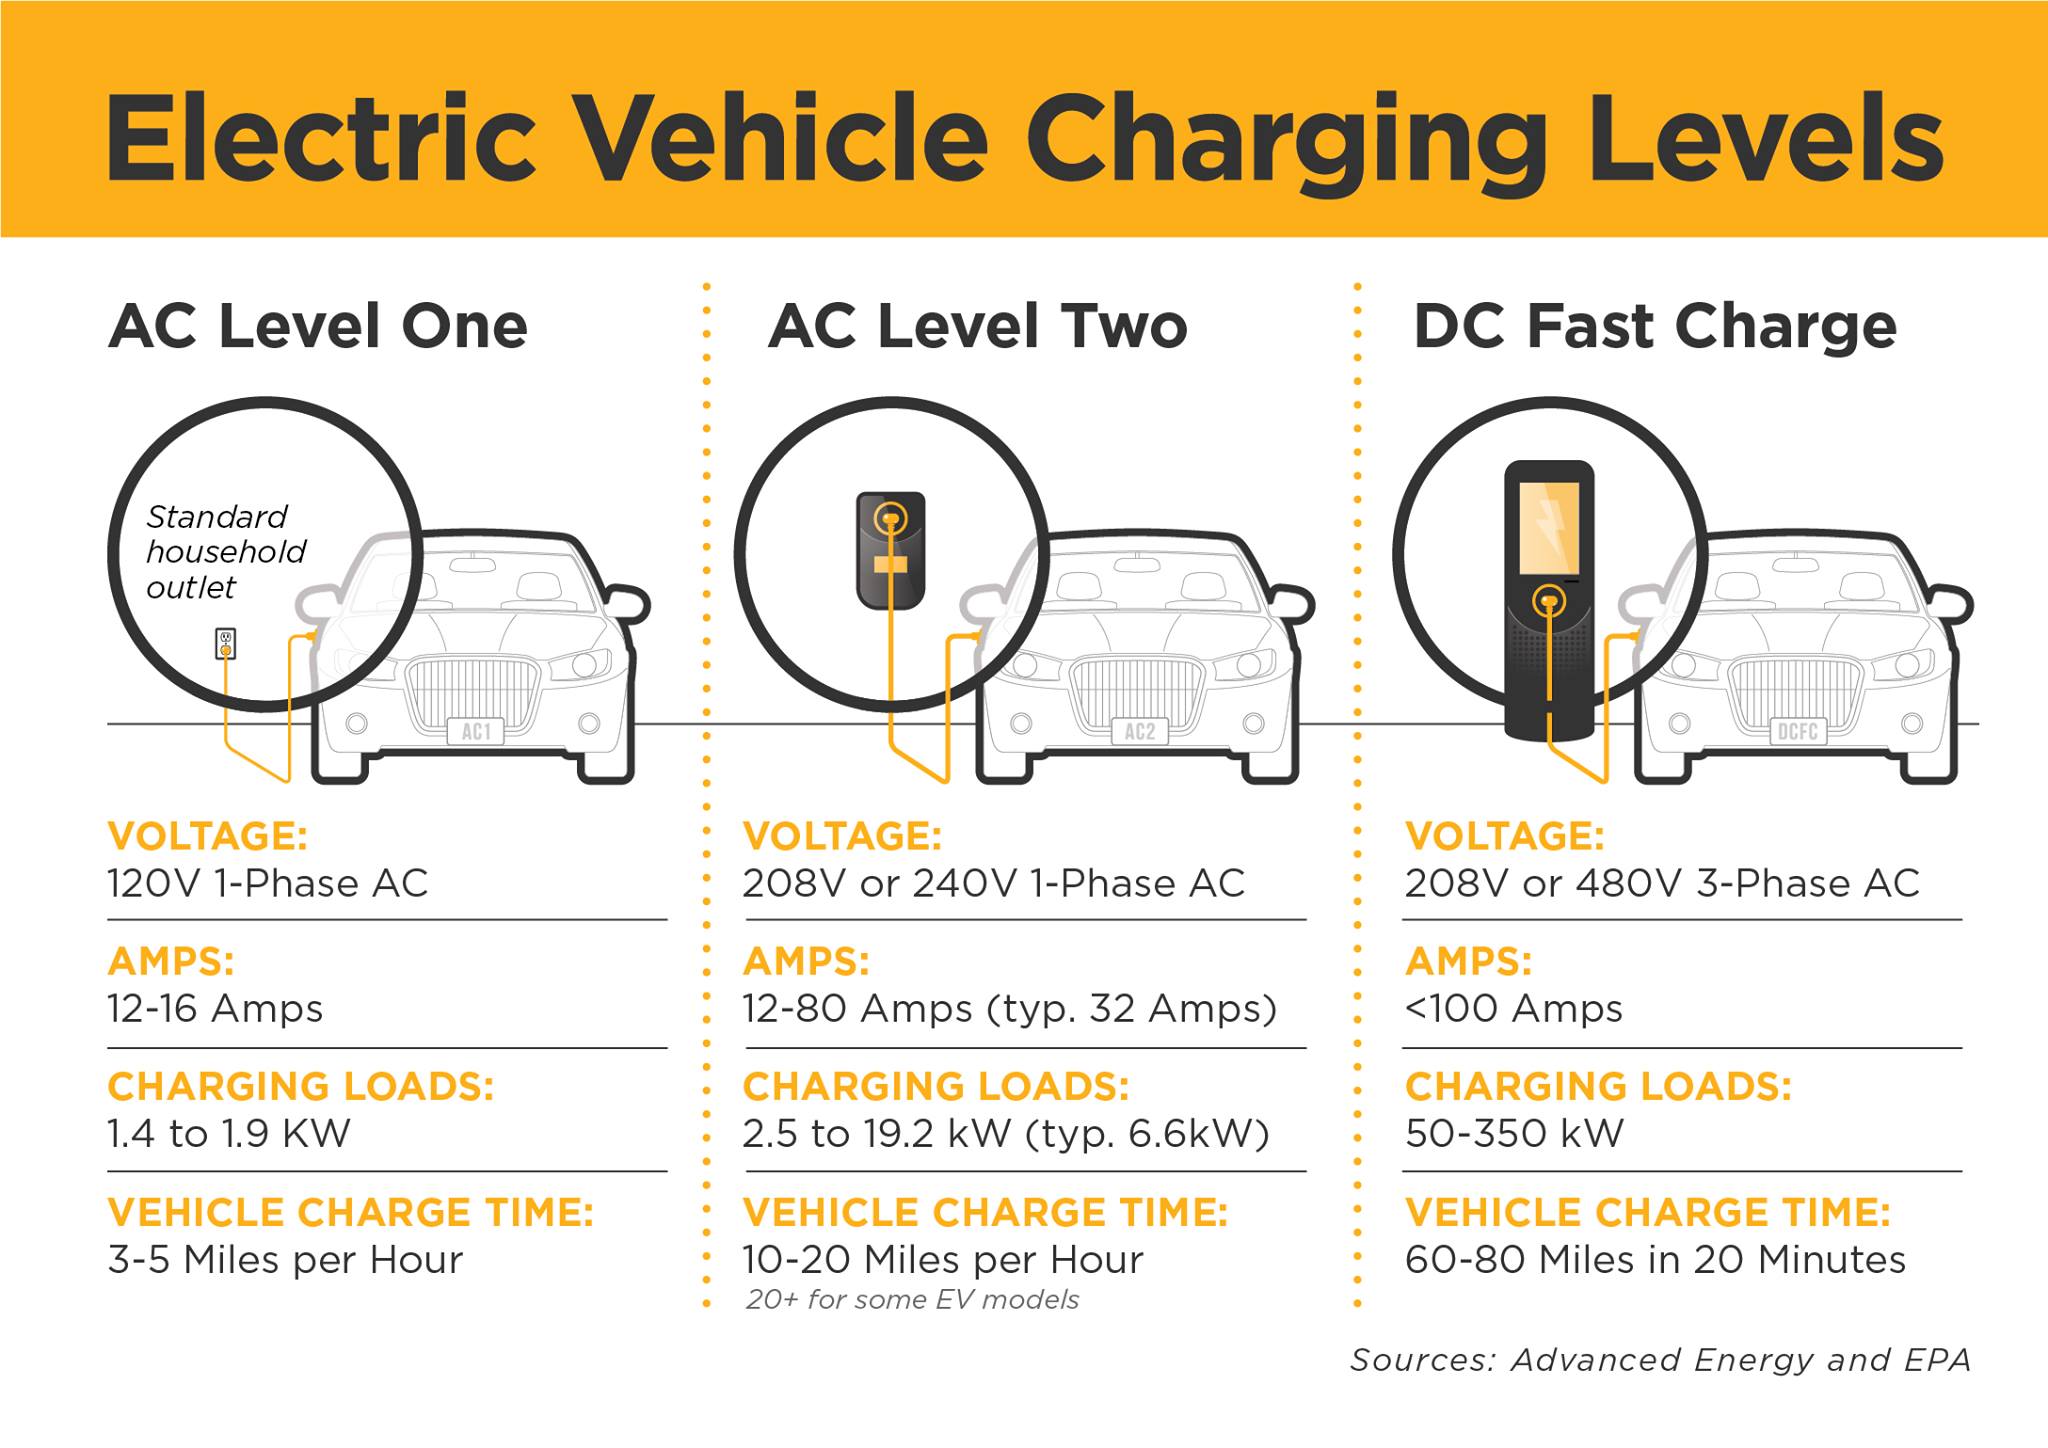 Electric vehicle charging levels